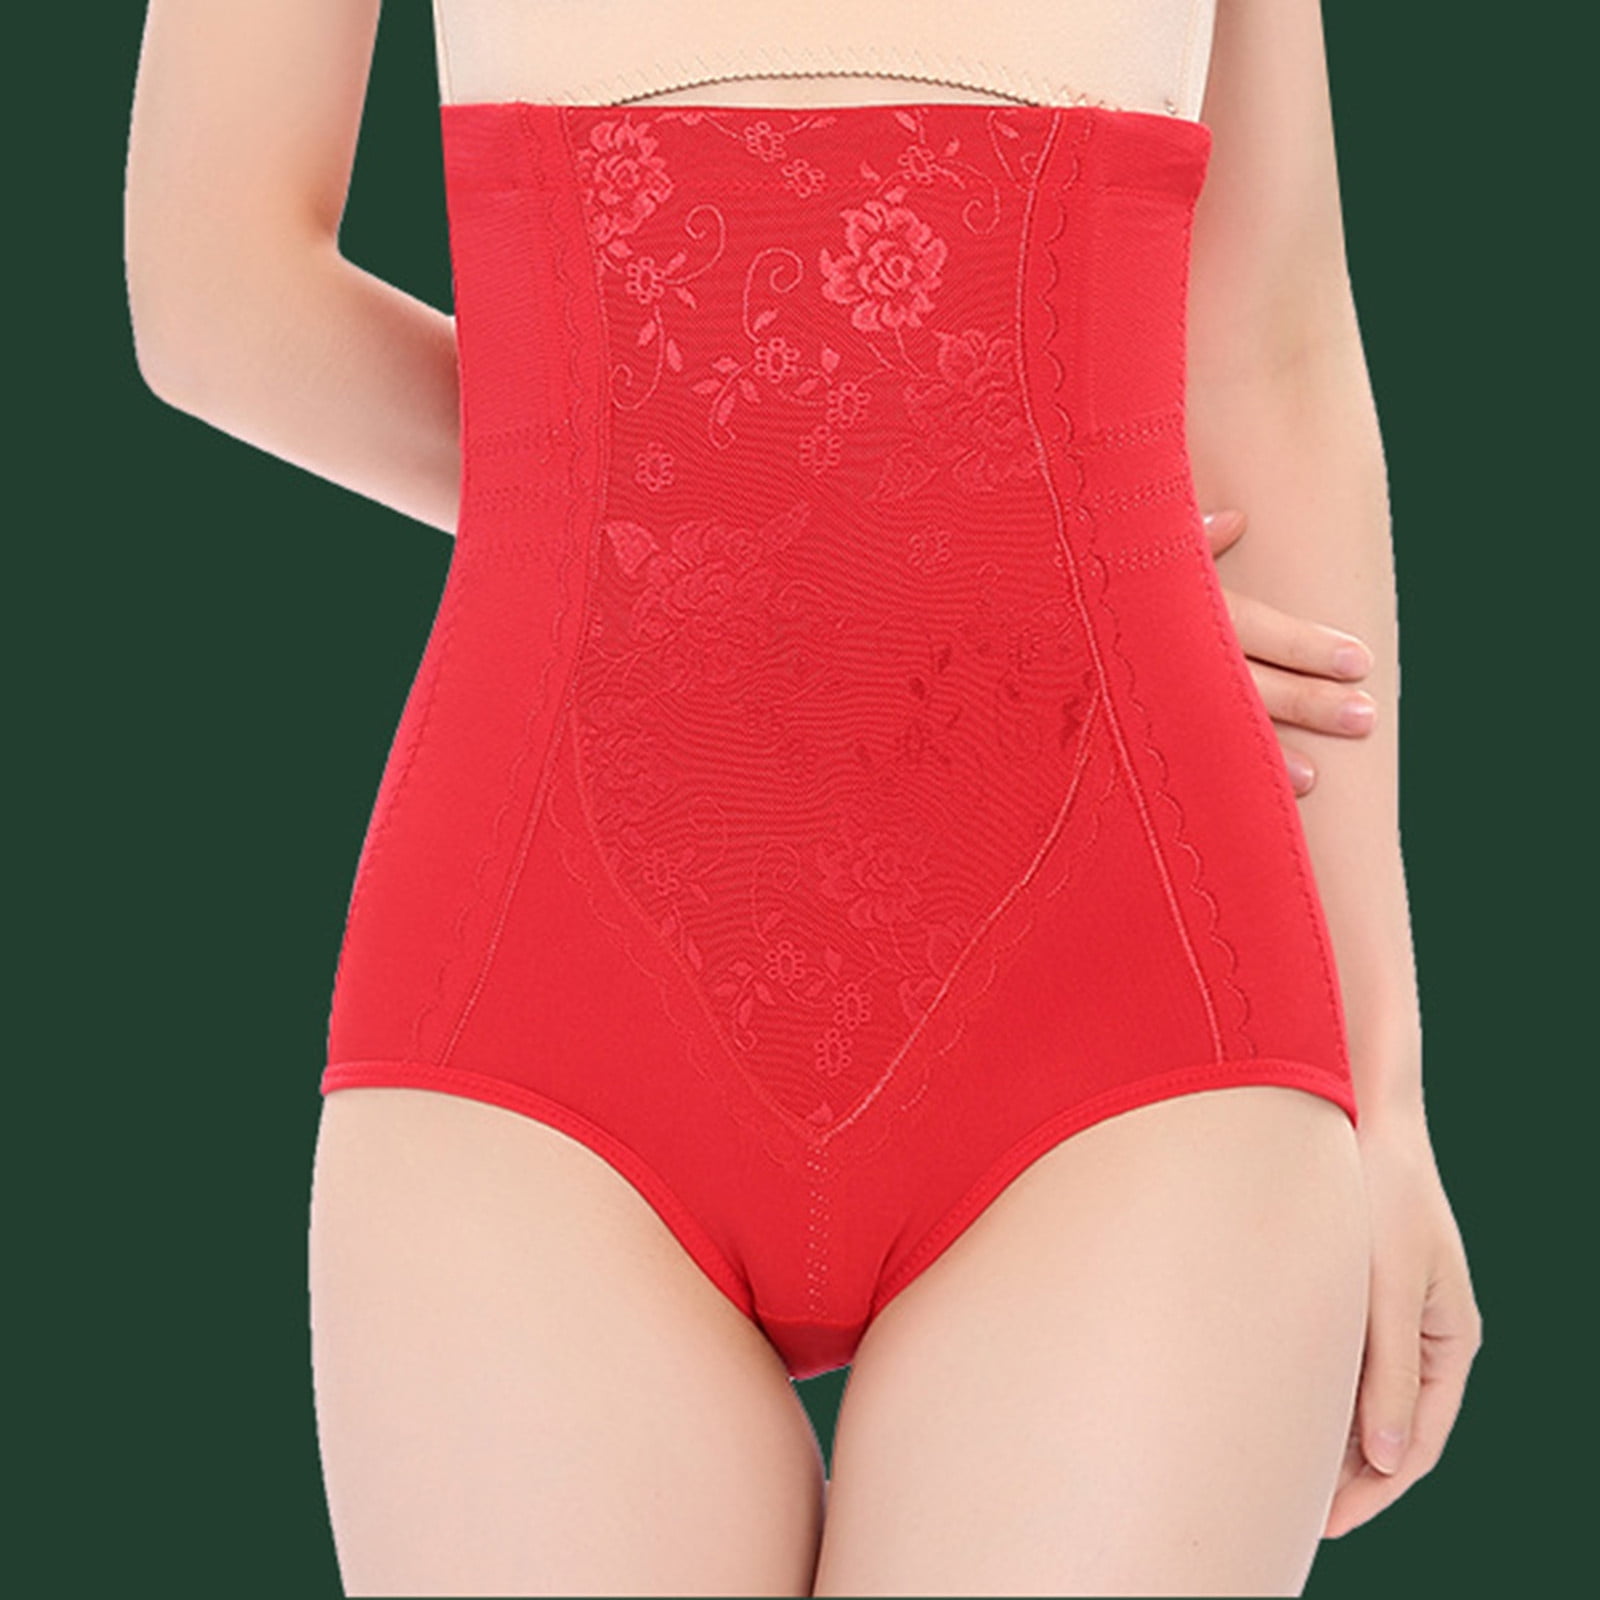 YWDJ Shapewear for Women Tummy Control Plus Sized Pants With Extra Weight  Toning Pants With A High Waist Red XL 